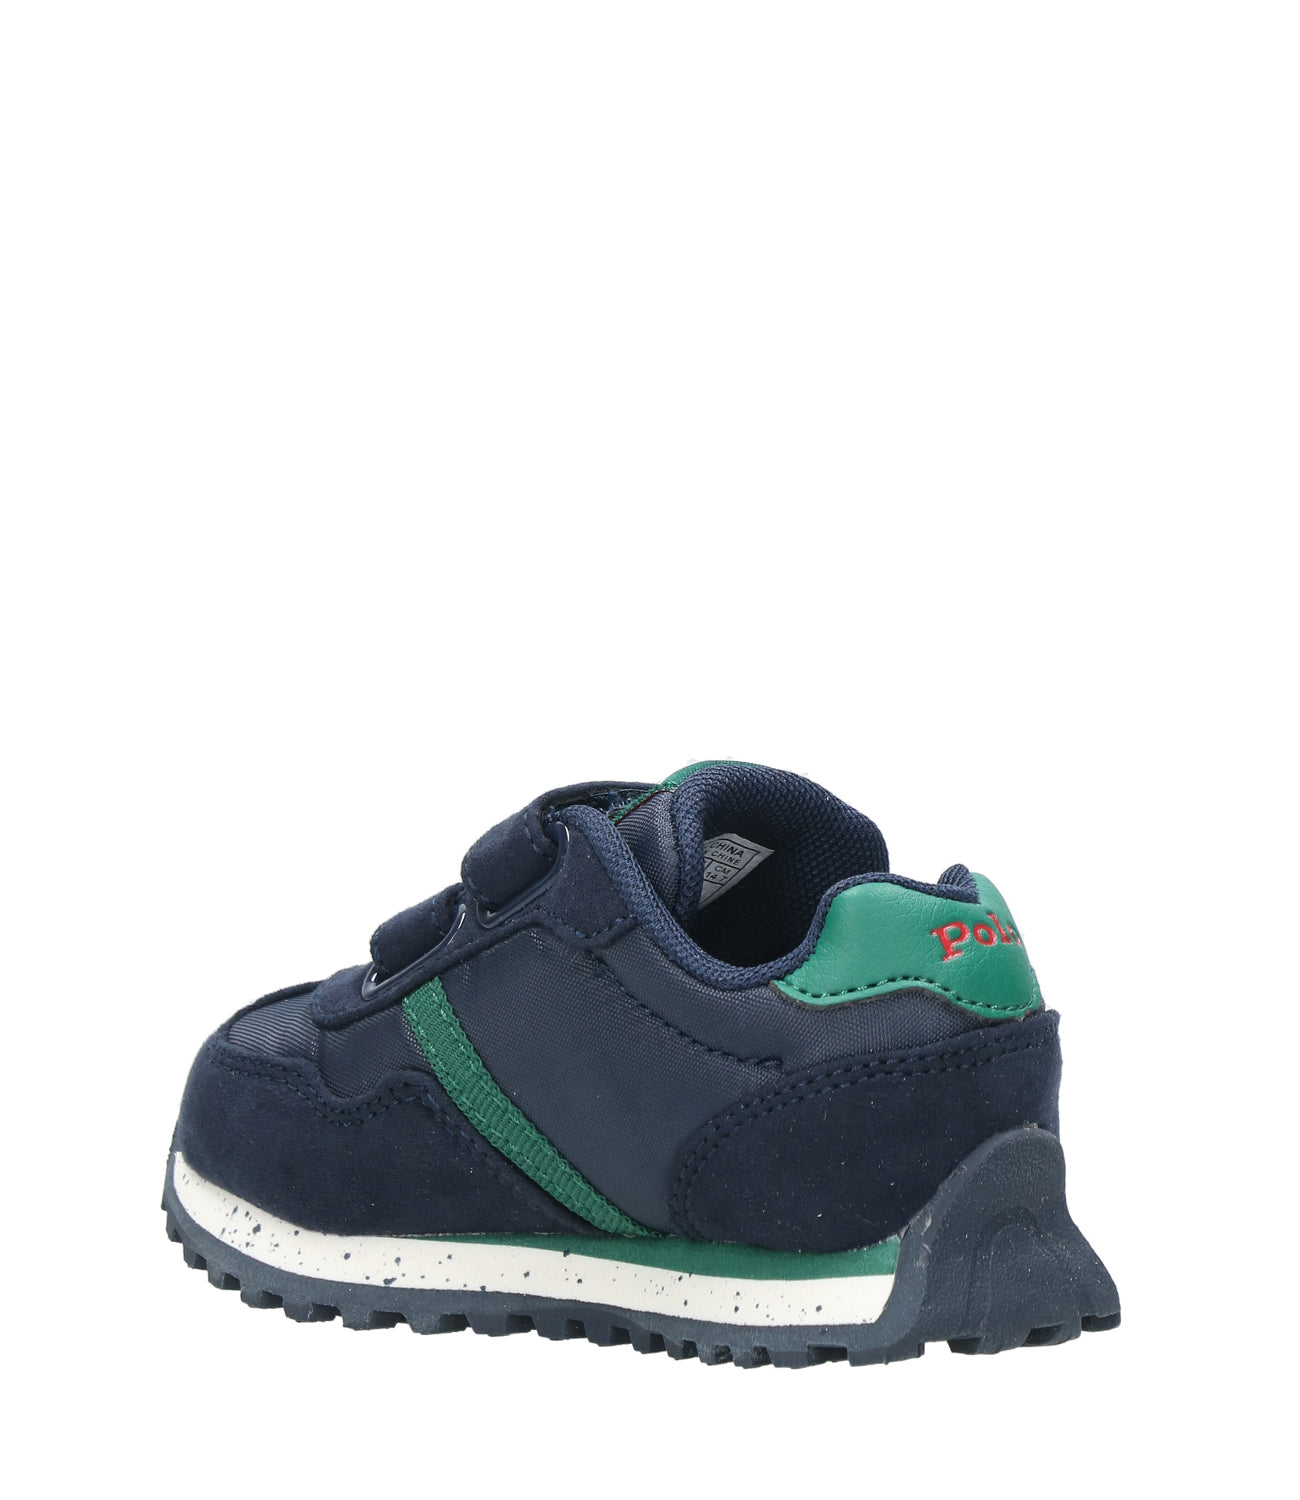 Ralph Lauren Childrenswear | Blue and Red Sneakers